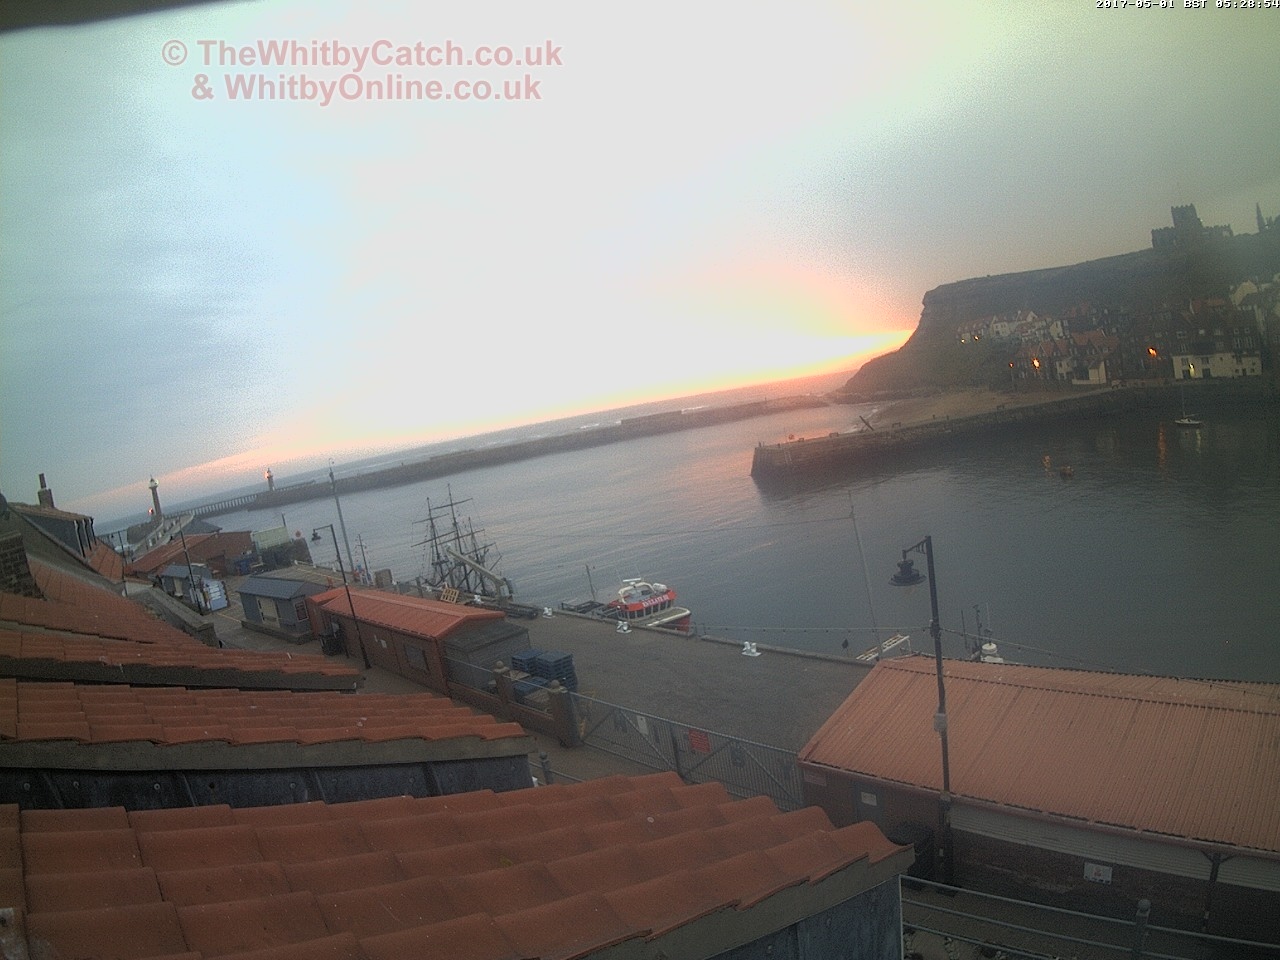 Whitby Mon 1st May 2017 05:29.